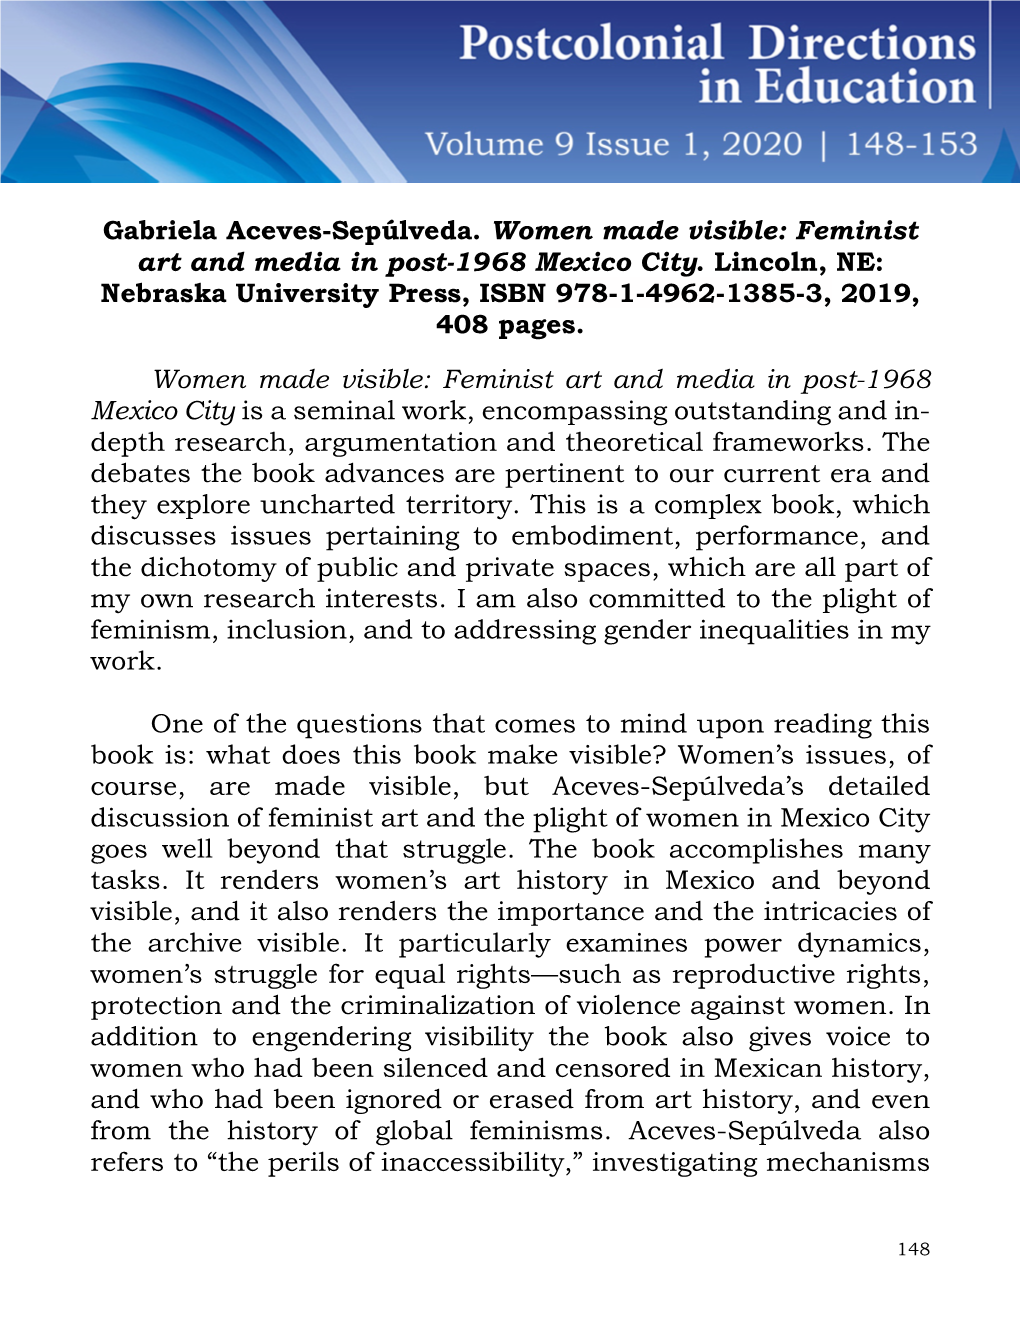 Gabriela Aceves-Sepúlveda. Women Made Visible: Feminist Art and Media in Post-1968 Mexico City